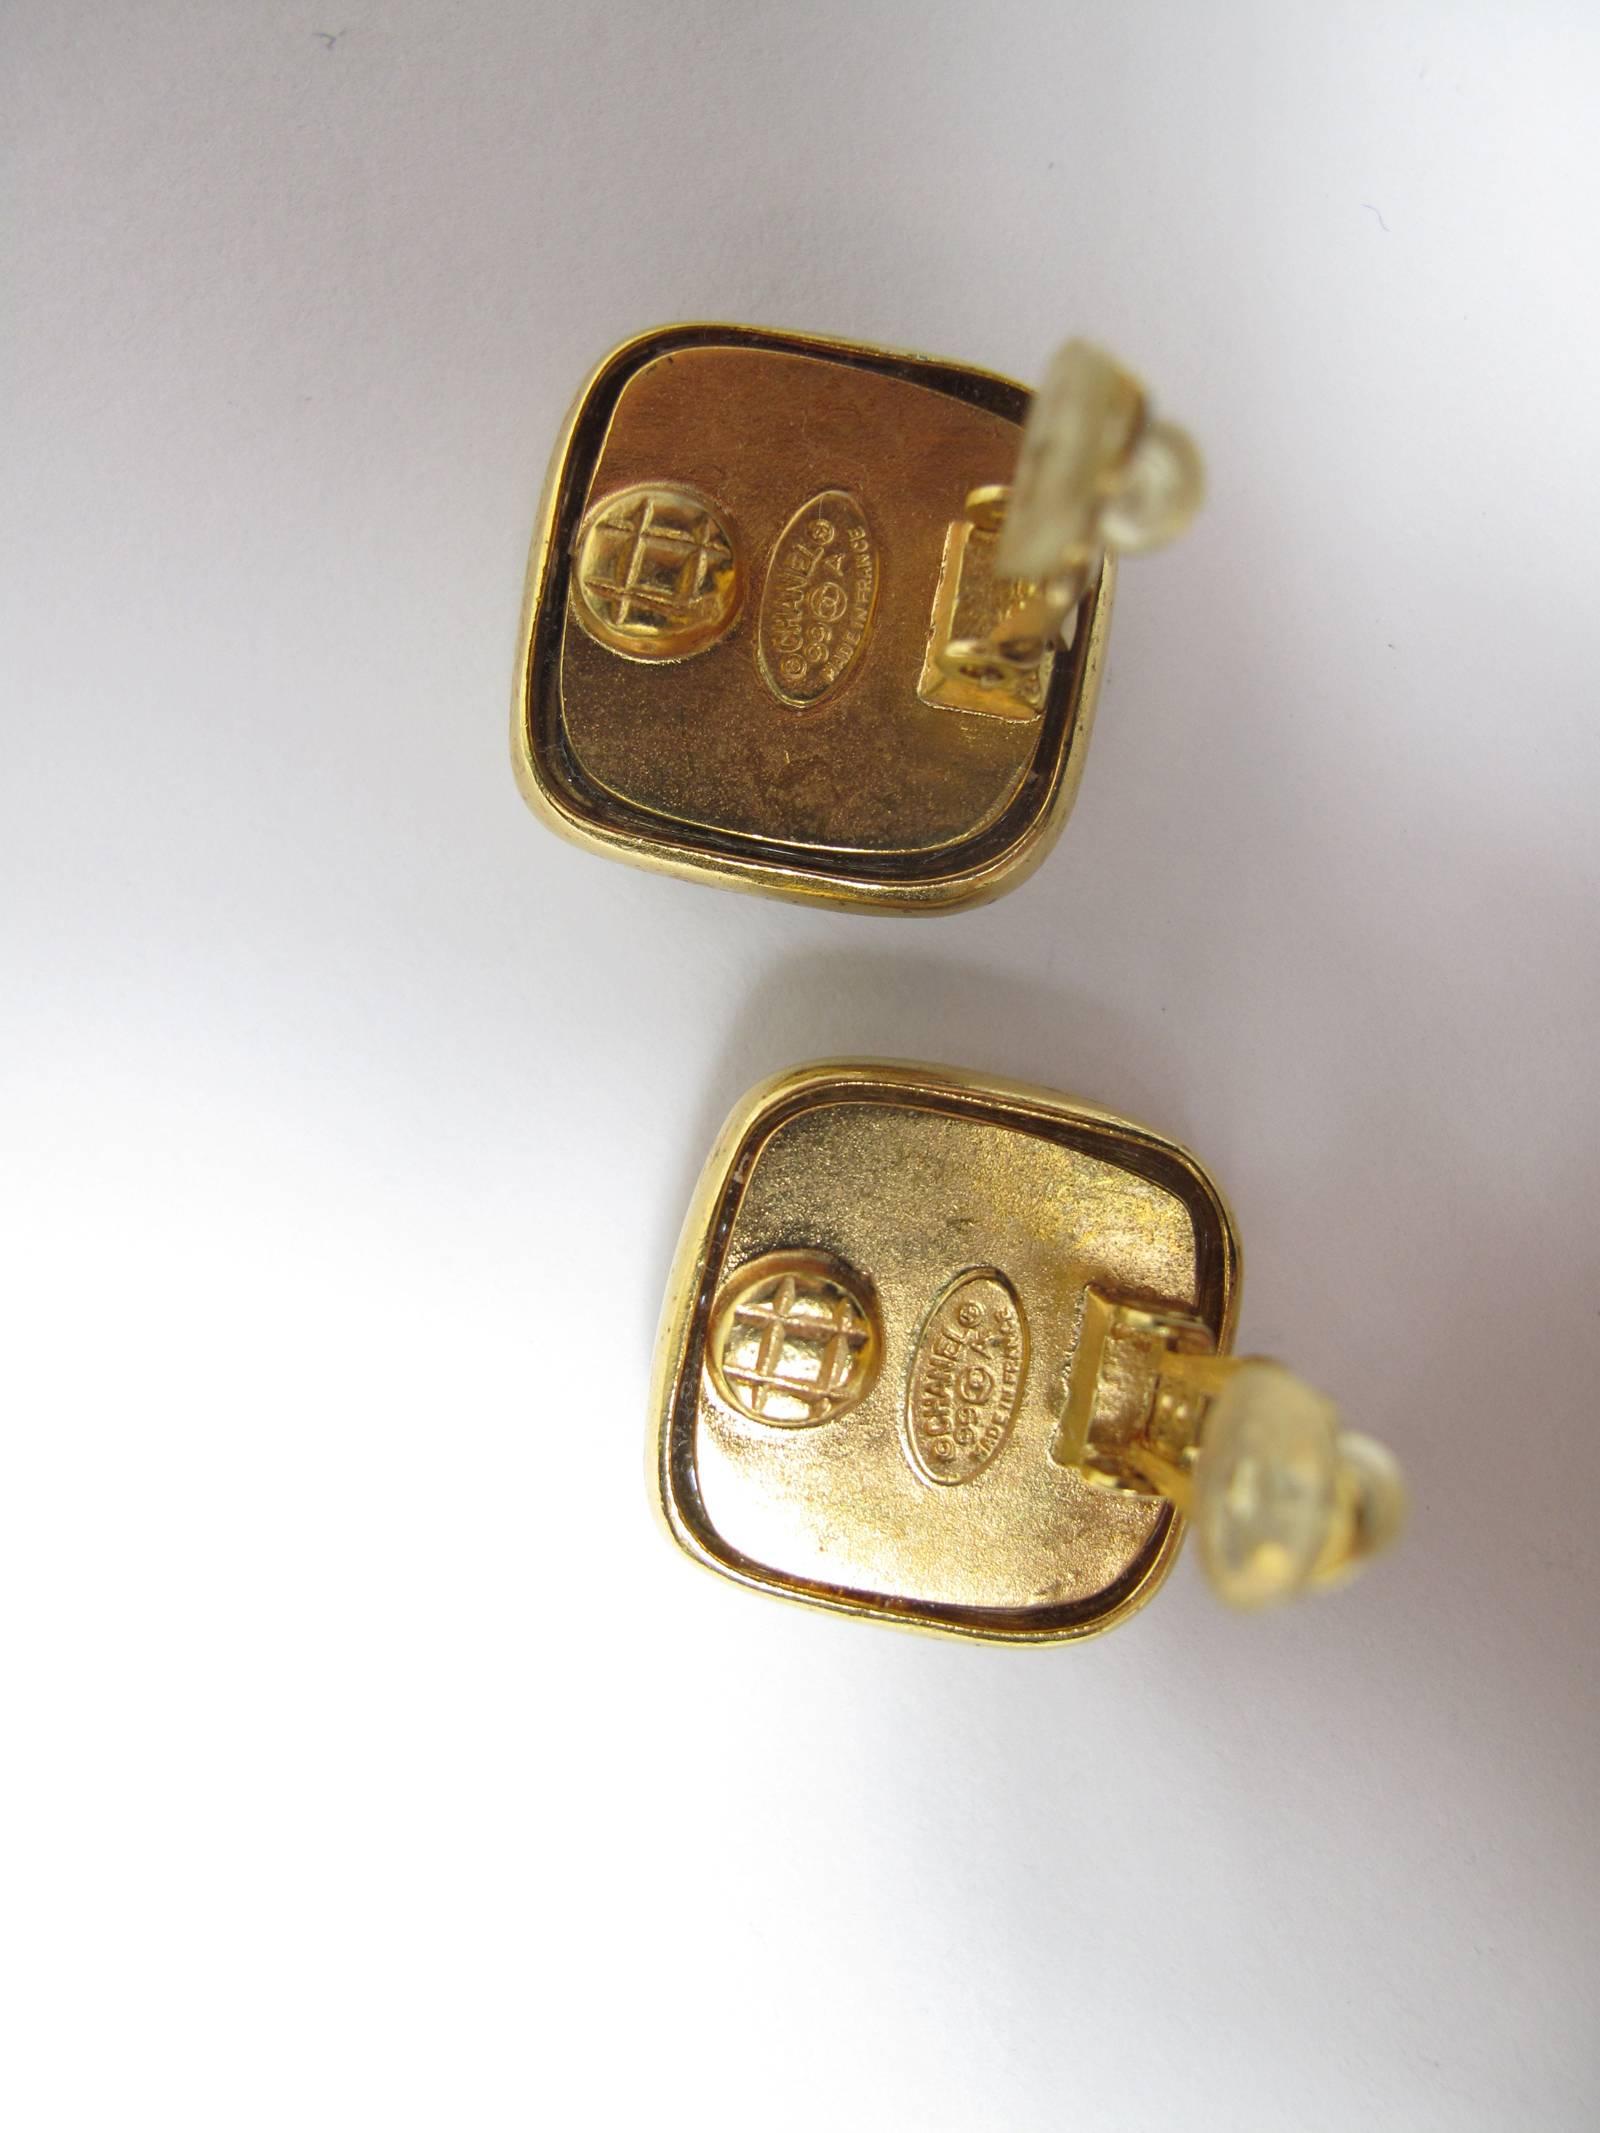 Chanel 1999 CC clip on earrings.  Condition: Excellent. 
We accept returns for refund, please see our terms.  We offer free ground shipping within the US.  Please let us know if you have any questions. 

